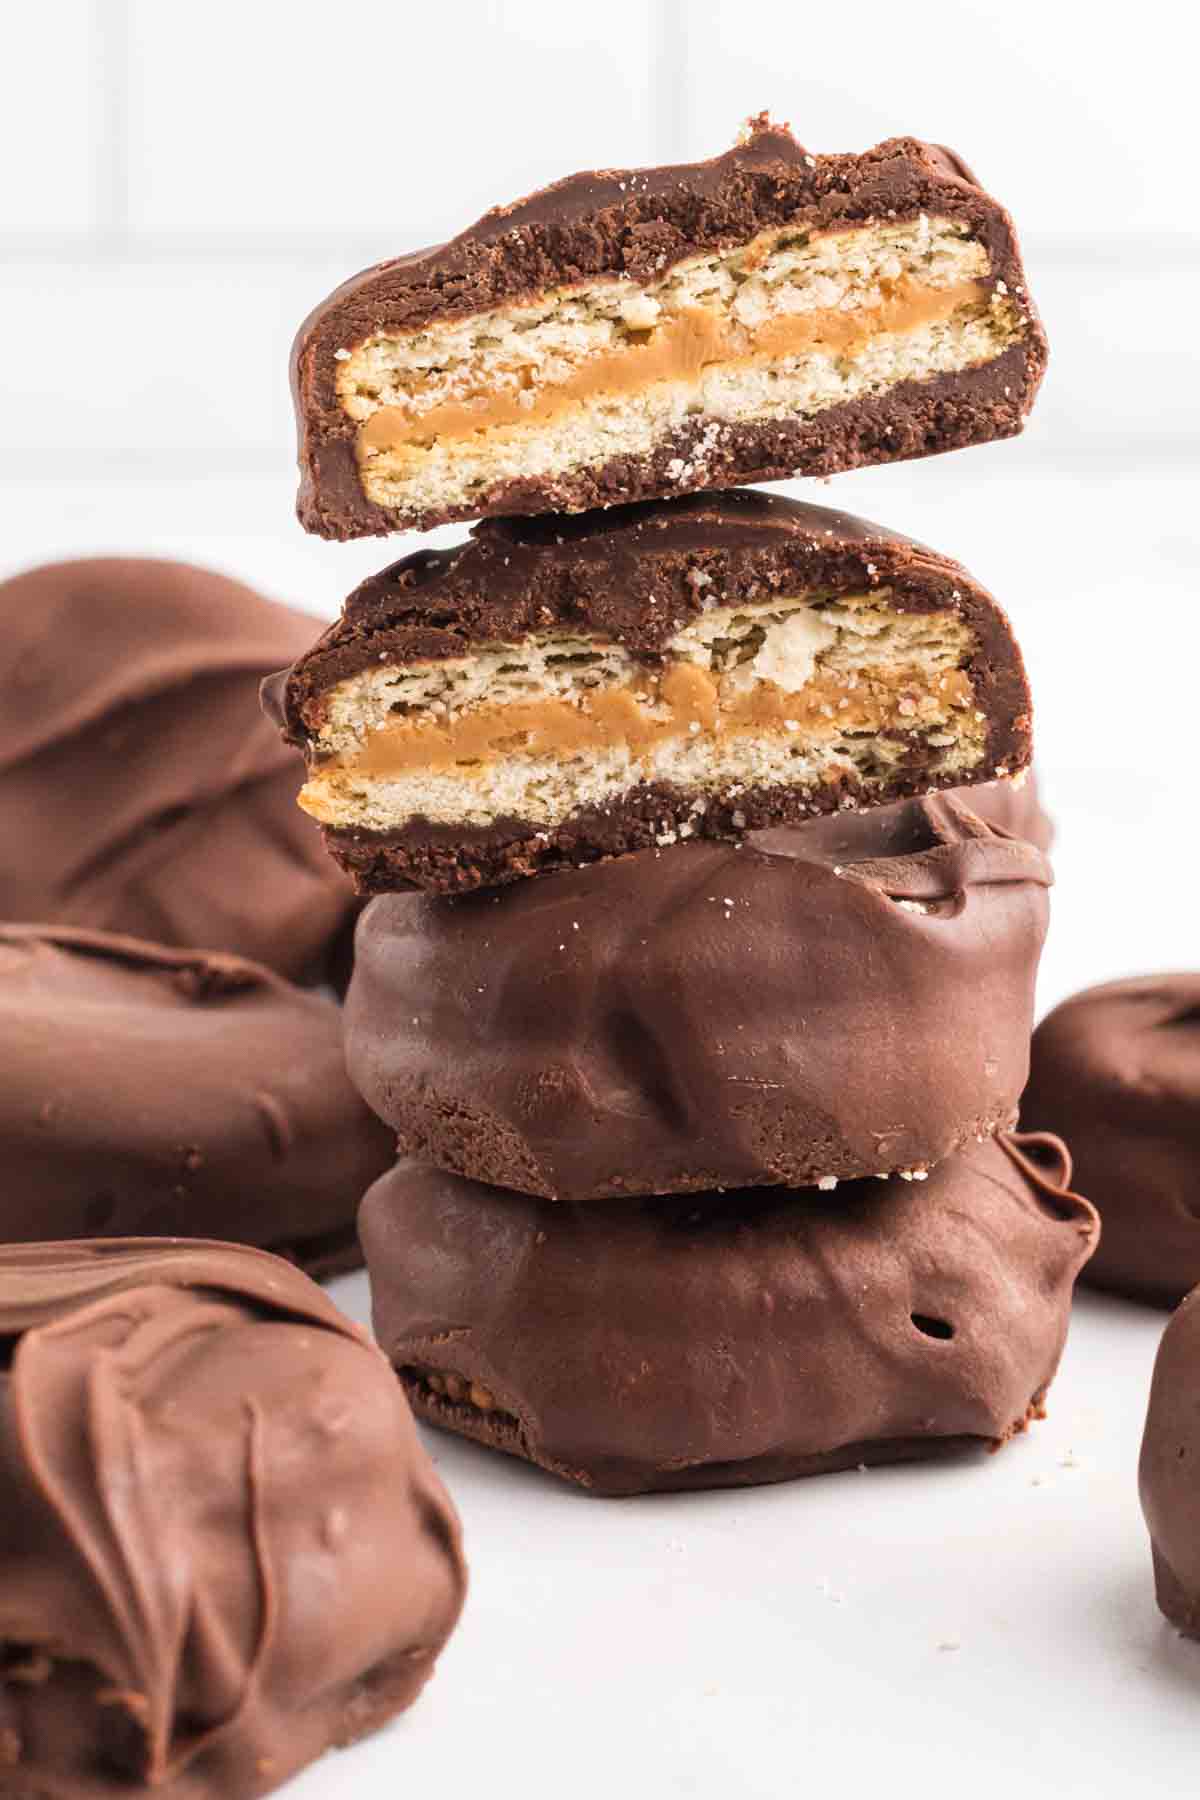 Chocolate Covered Ritz Crackers stacked